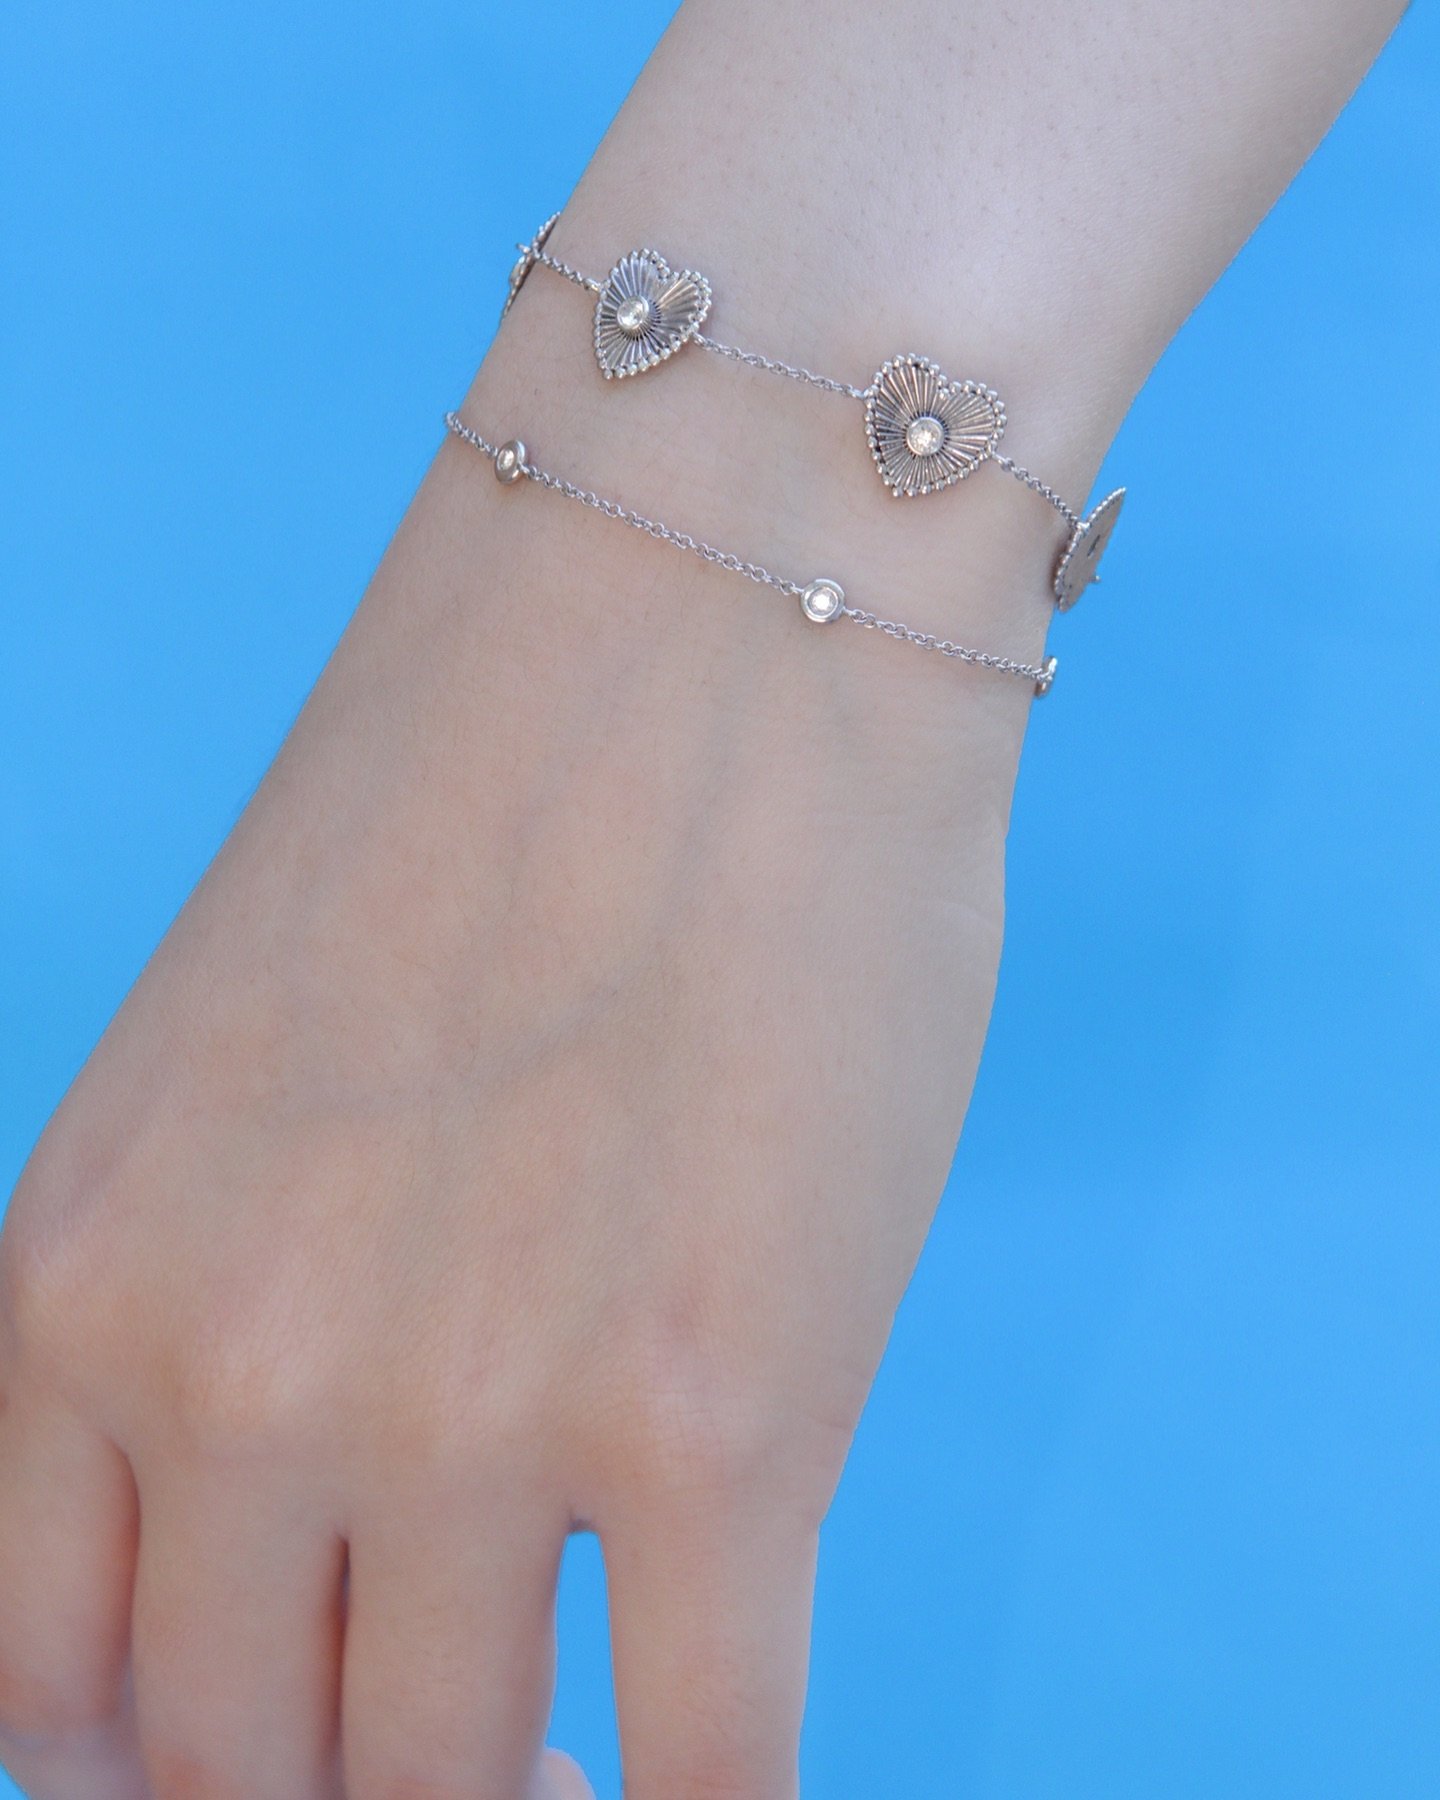 Wear your heart on your sleeve&hellip;Now available in white gold! 
💕
#whitegold #whitegoldjewelry #heartbracelet #lovethis #loveyou #finejewelry #jewelry